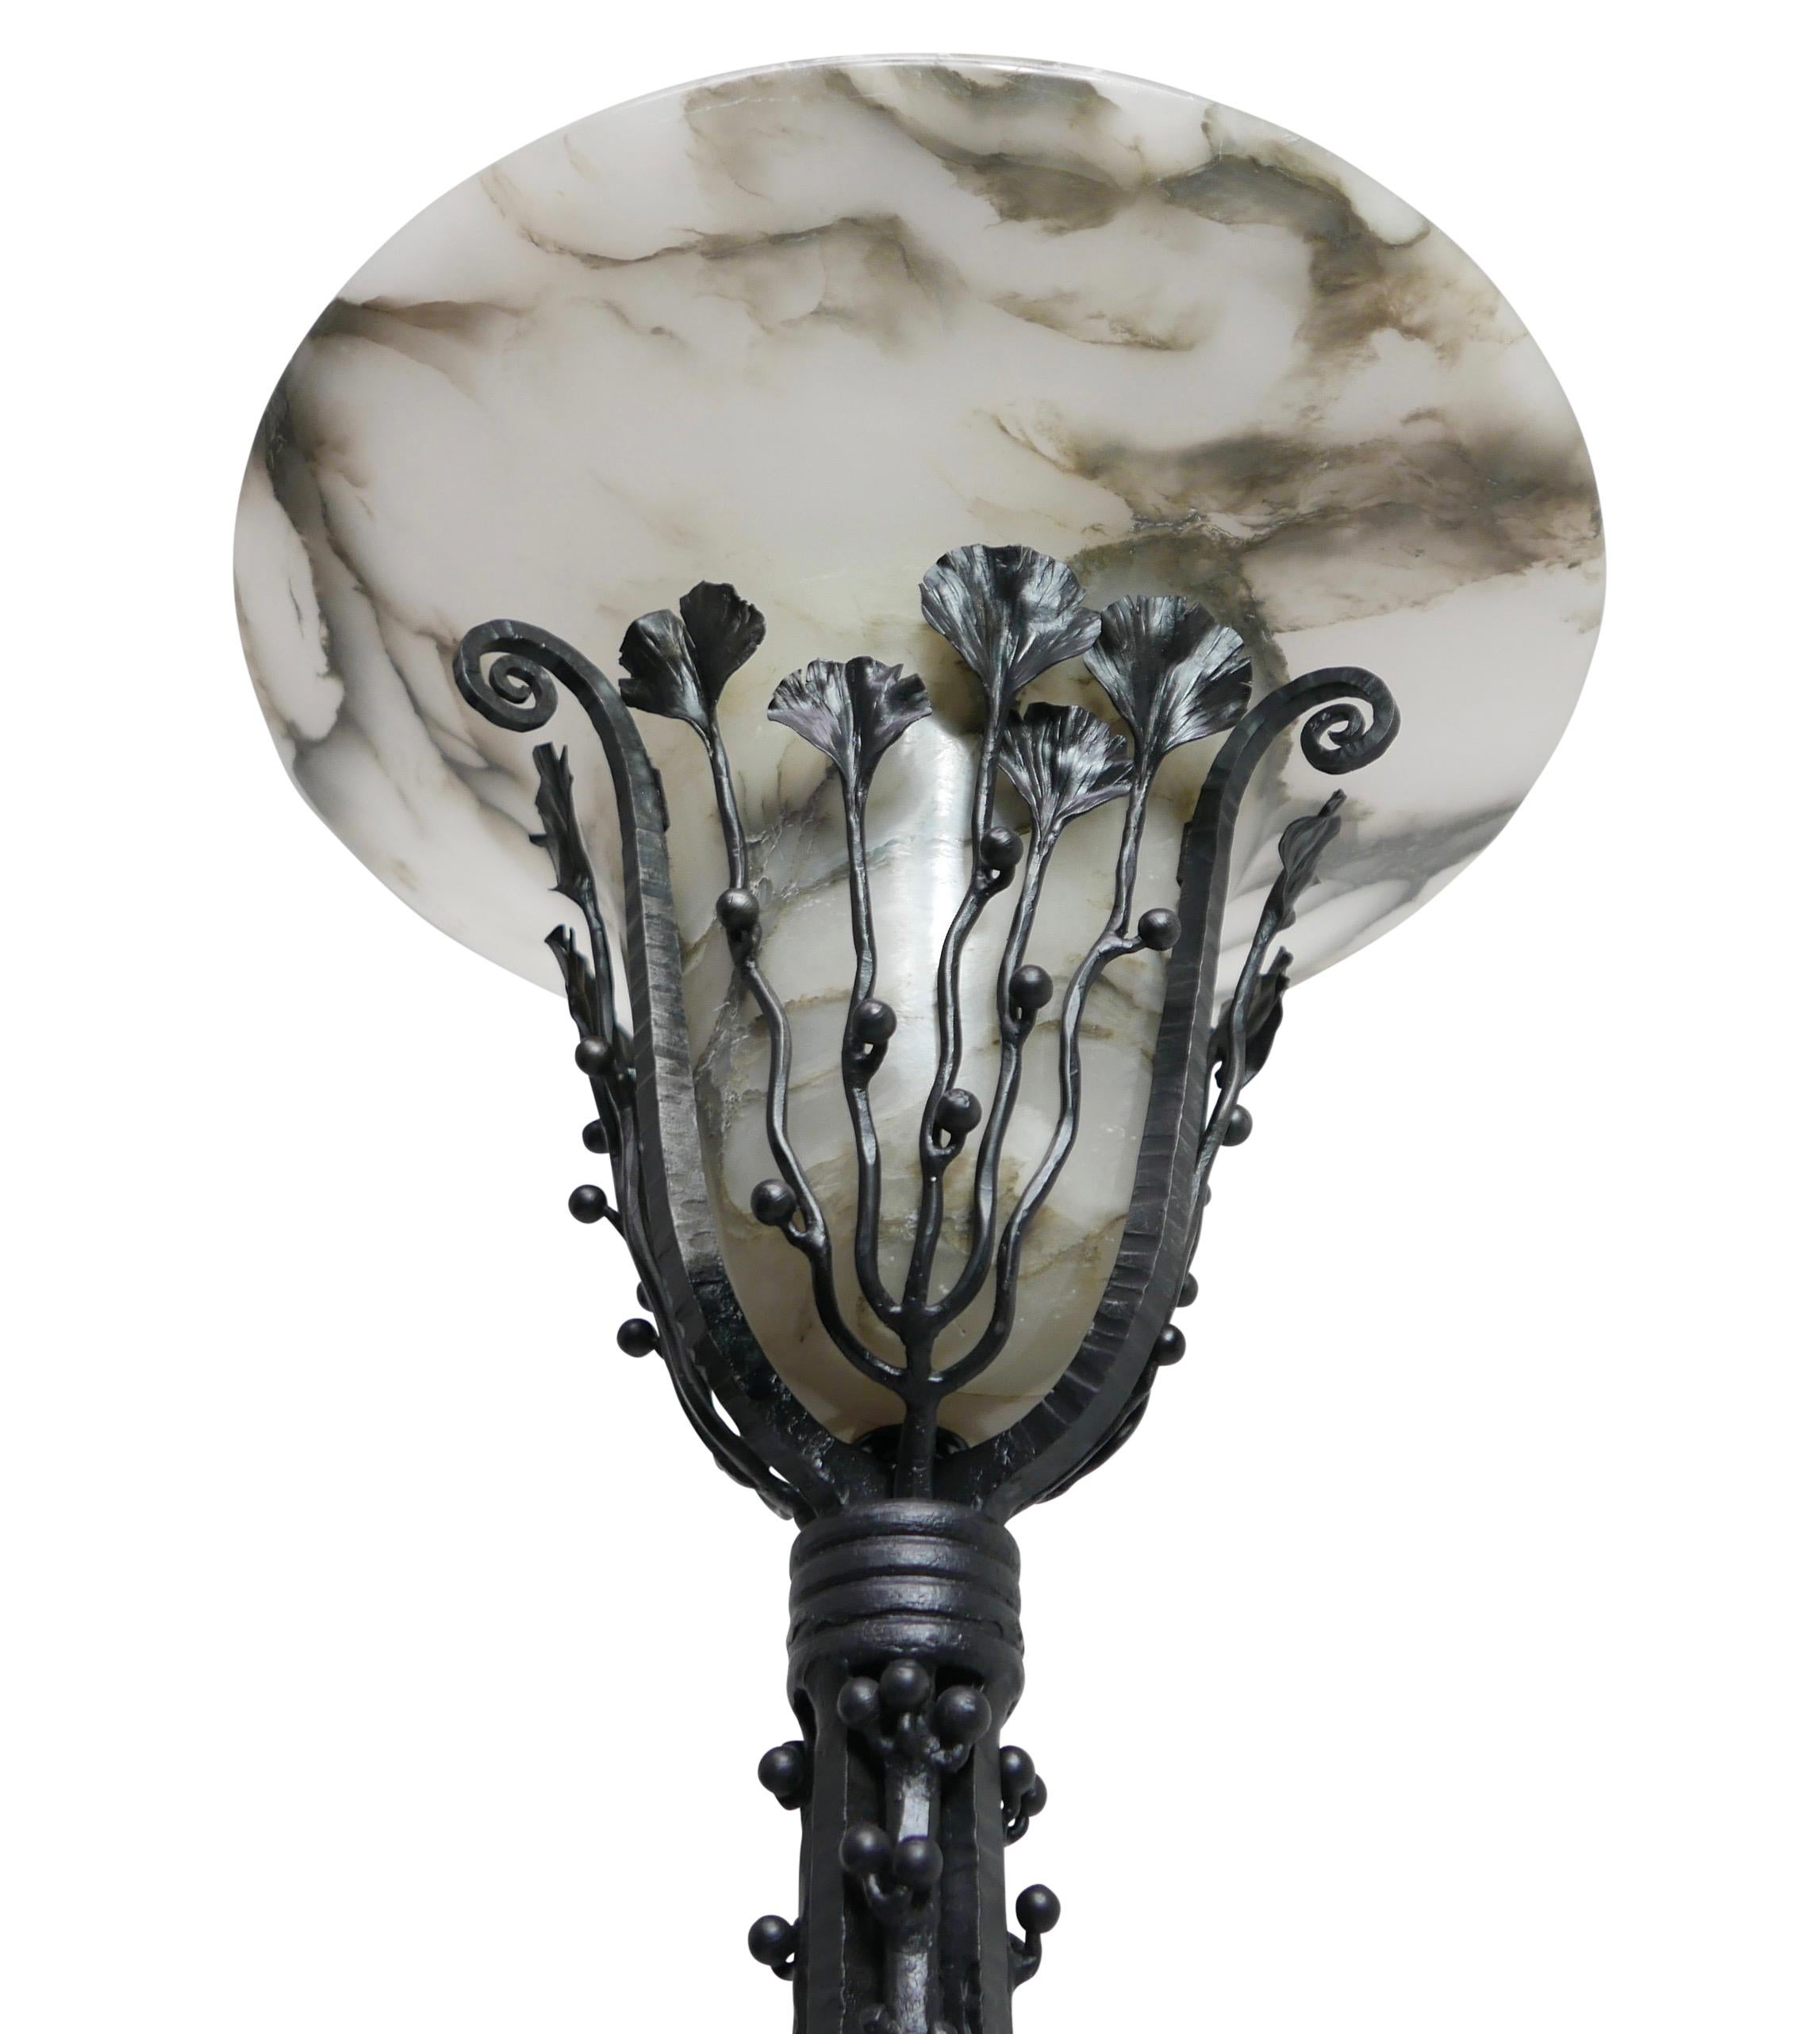 Art Deco Wrought Iron Floor Lamp with Alabaster Shade, French, circa 1920 For Sale 1